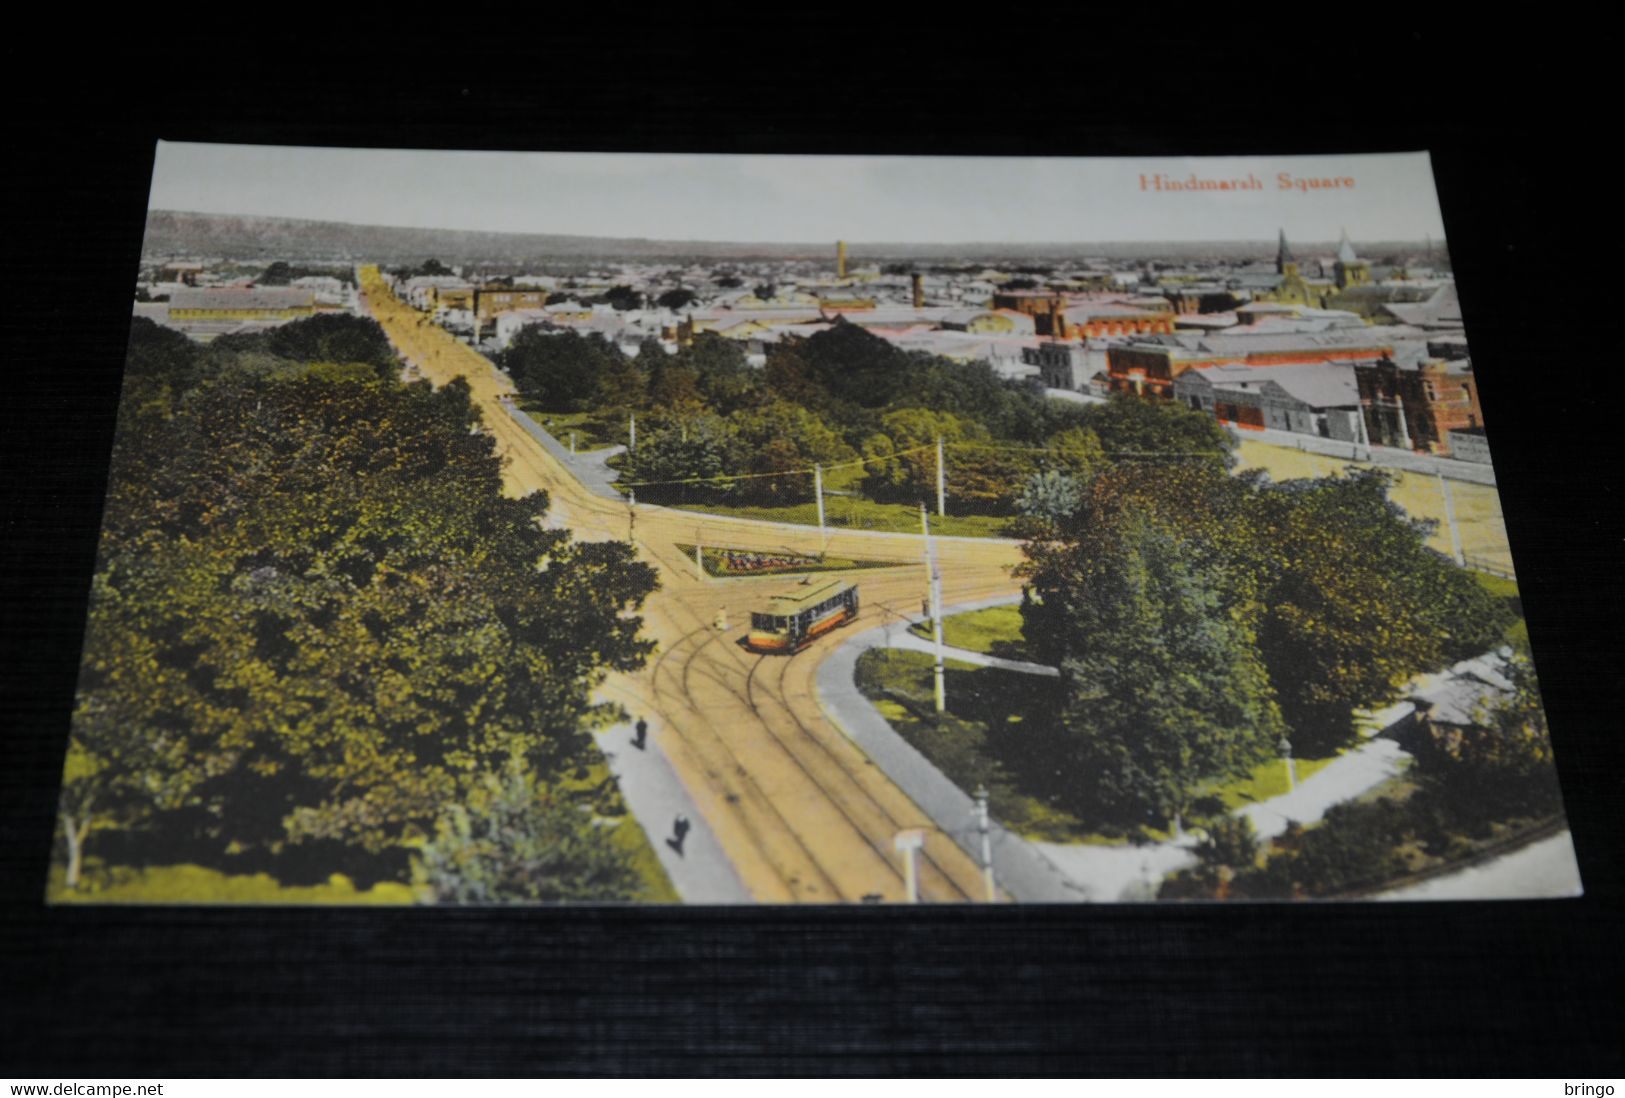 30567-              SOUTH AUSTRALIA, ADELAIDE, HINDMARSH SQUARE / CIVIC COLLECTION ITEM - Adelaide